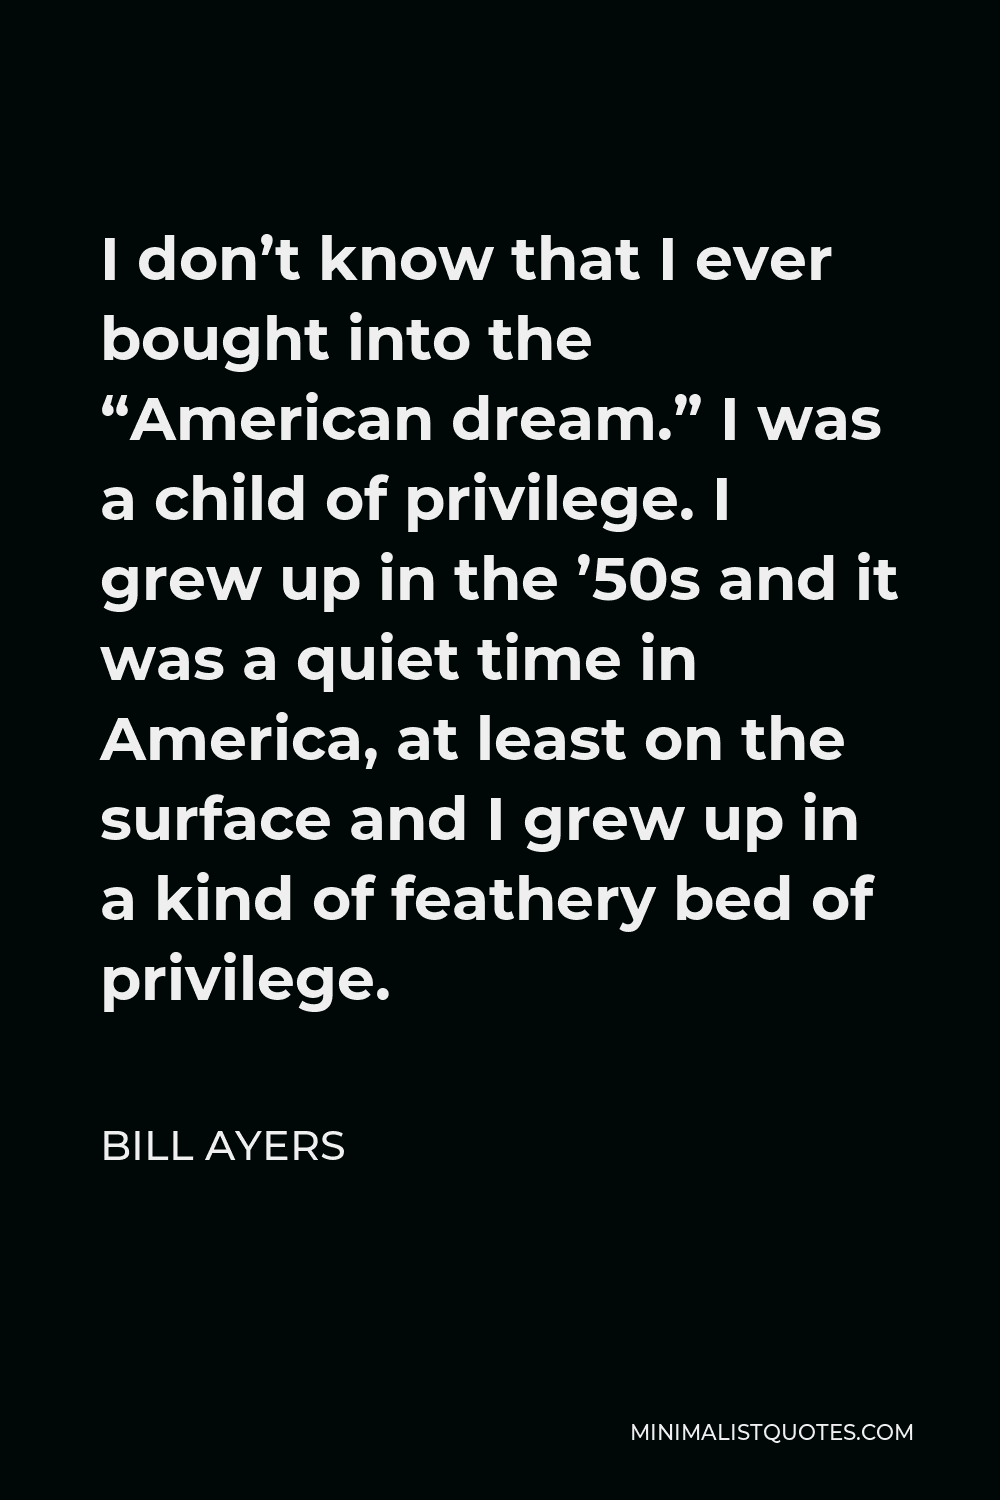 Bill Ayers Quote - I don’t know that I ever bought into the “American dream.” I was a child of privilege. I grew up in the ’50s and it was a quiet time in America, at least on the surface and I grew up in a kind of feathery bed of privilege.